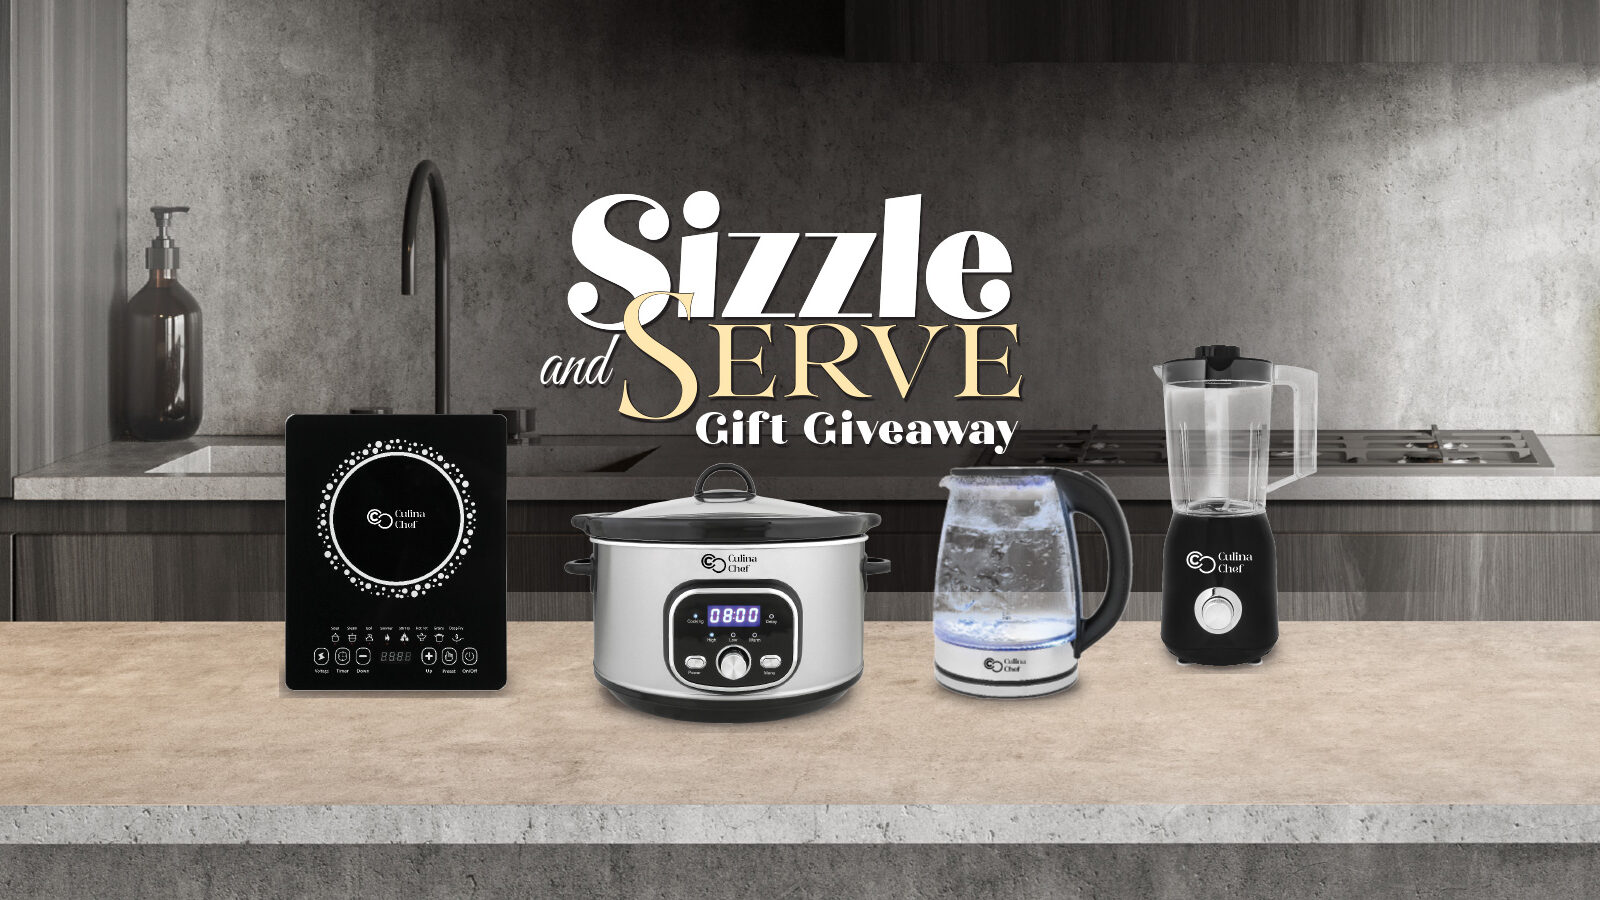 Sizzle and Serve Gift Giveaway